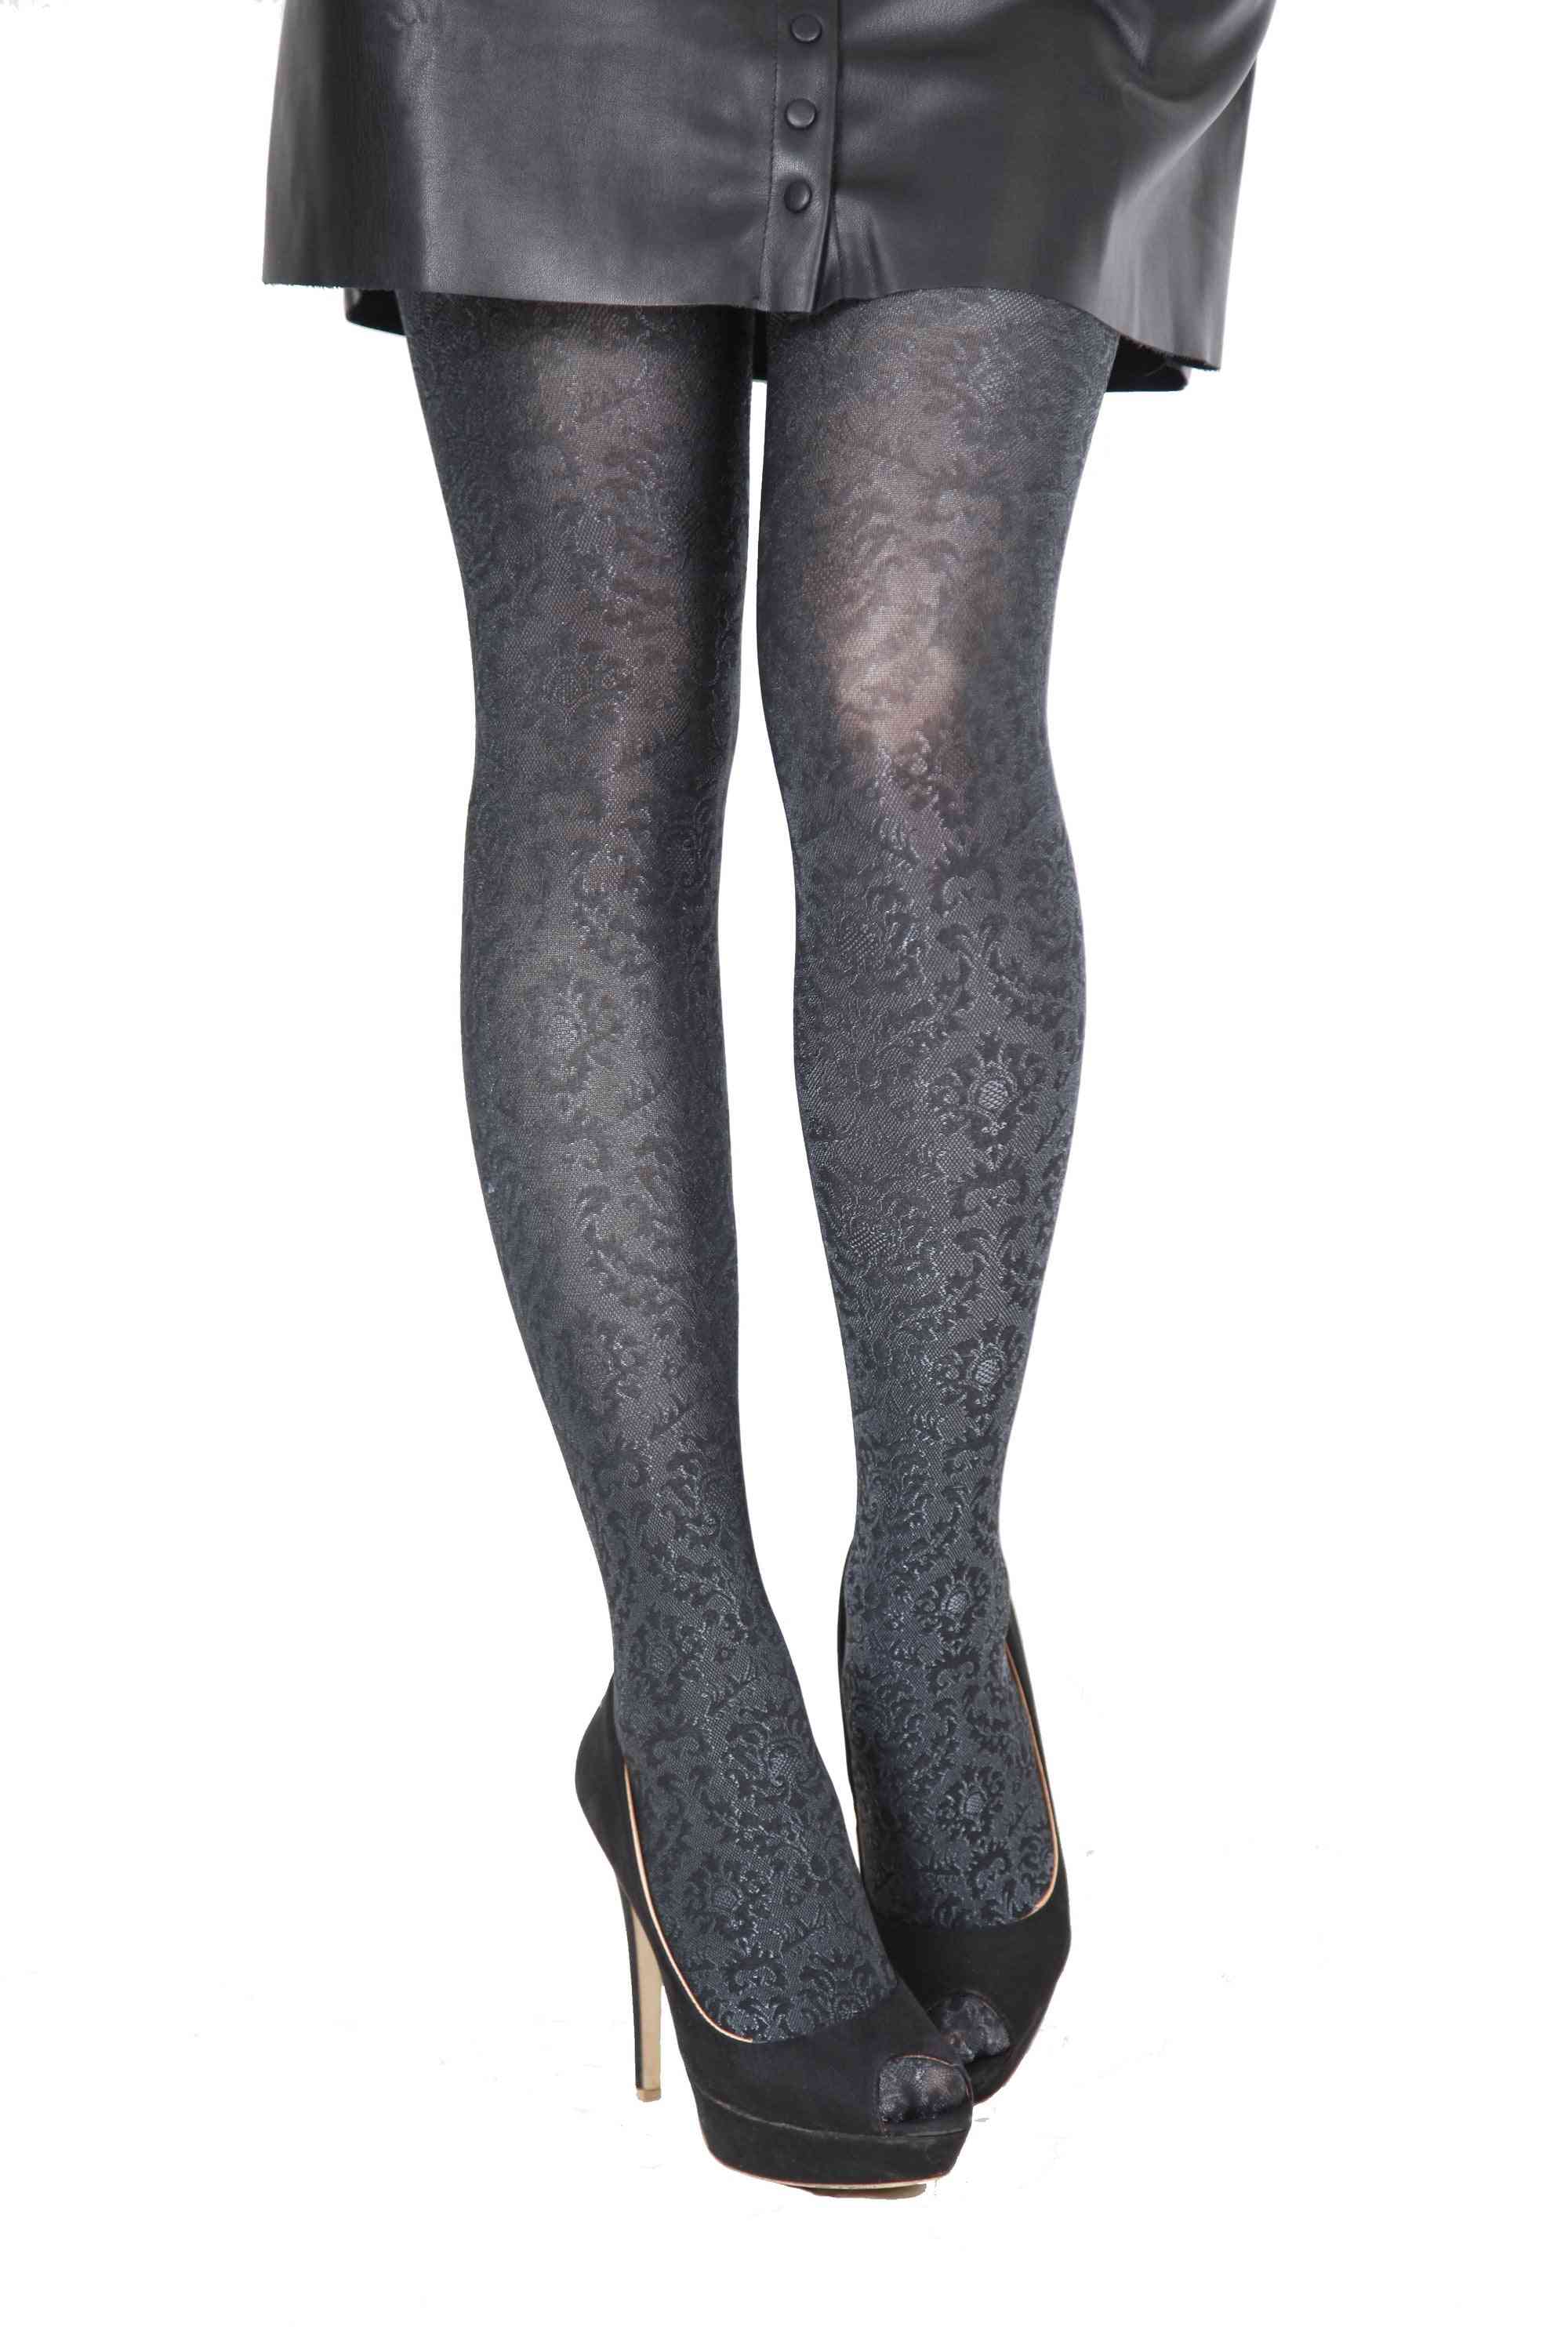 Floral Pattern Tights For Women